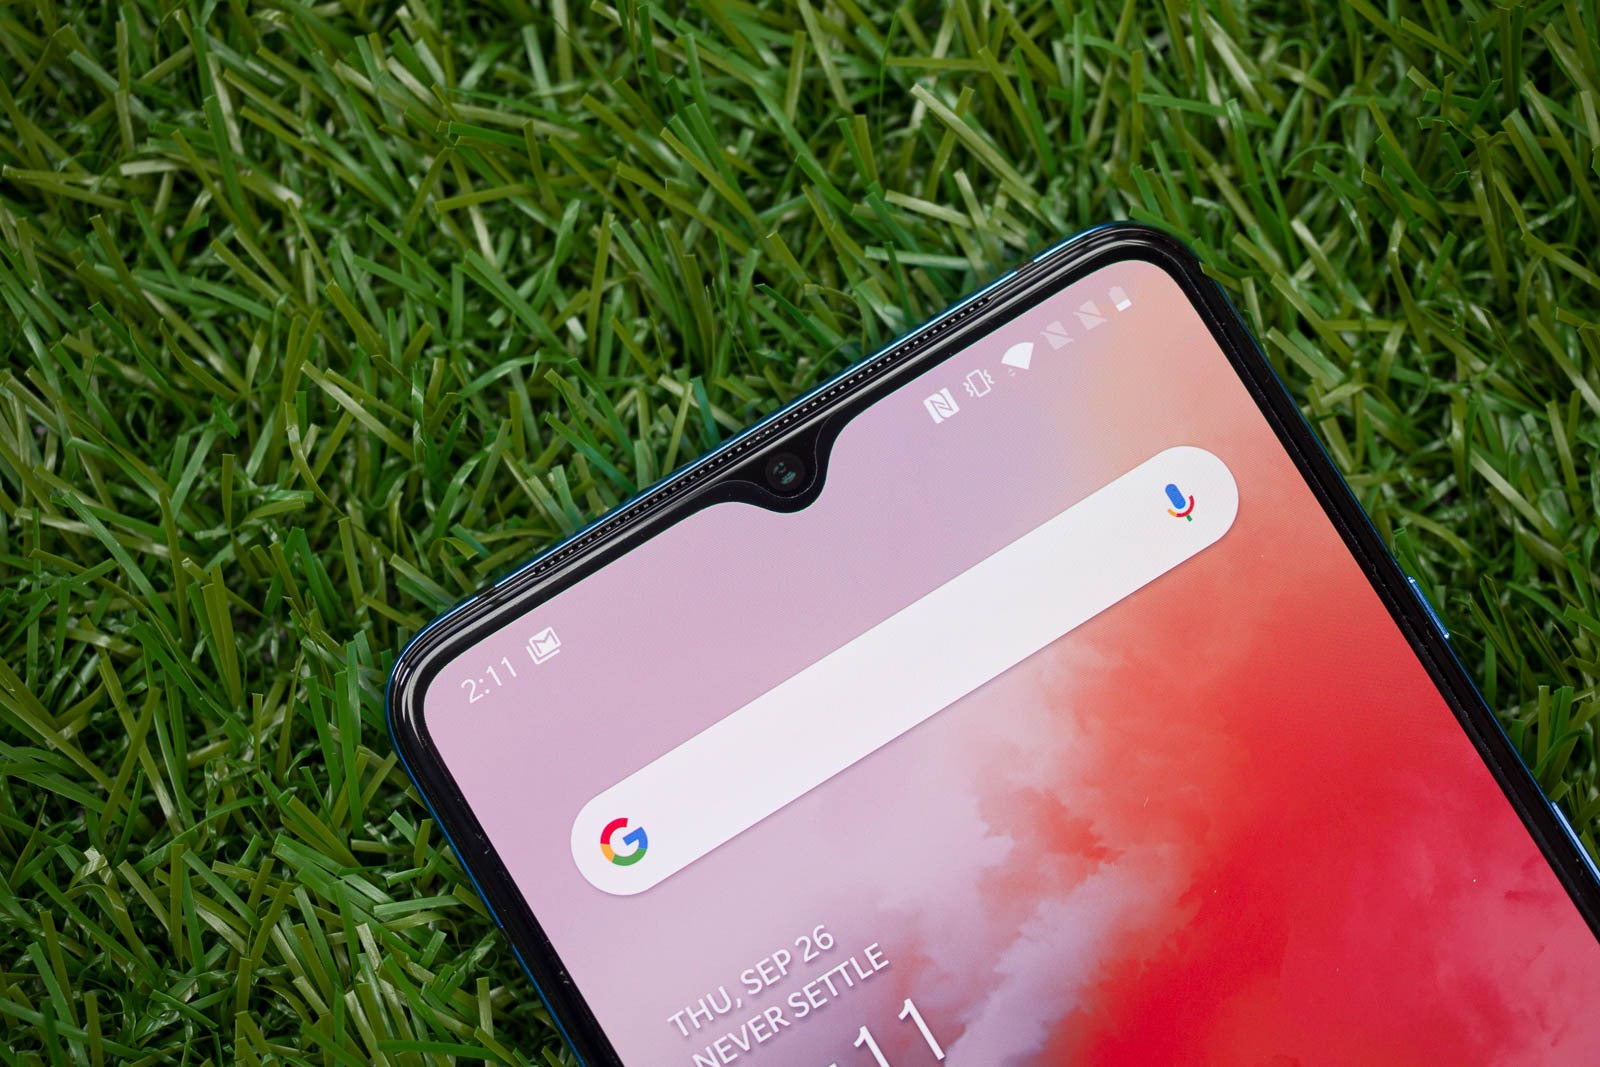 OnePlus 7T is here: 90 Hertz screen, fastest chip and triple camera at an incredible price (hands-on)